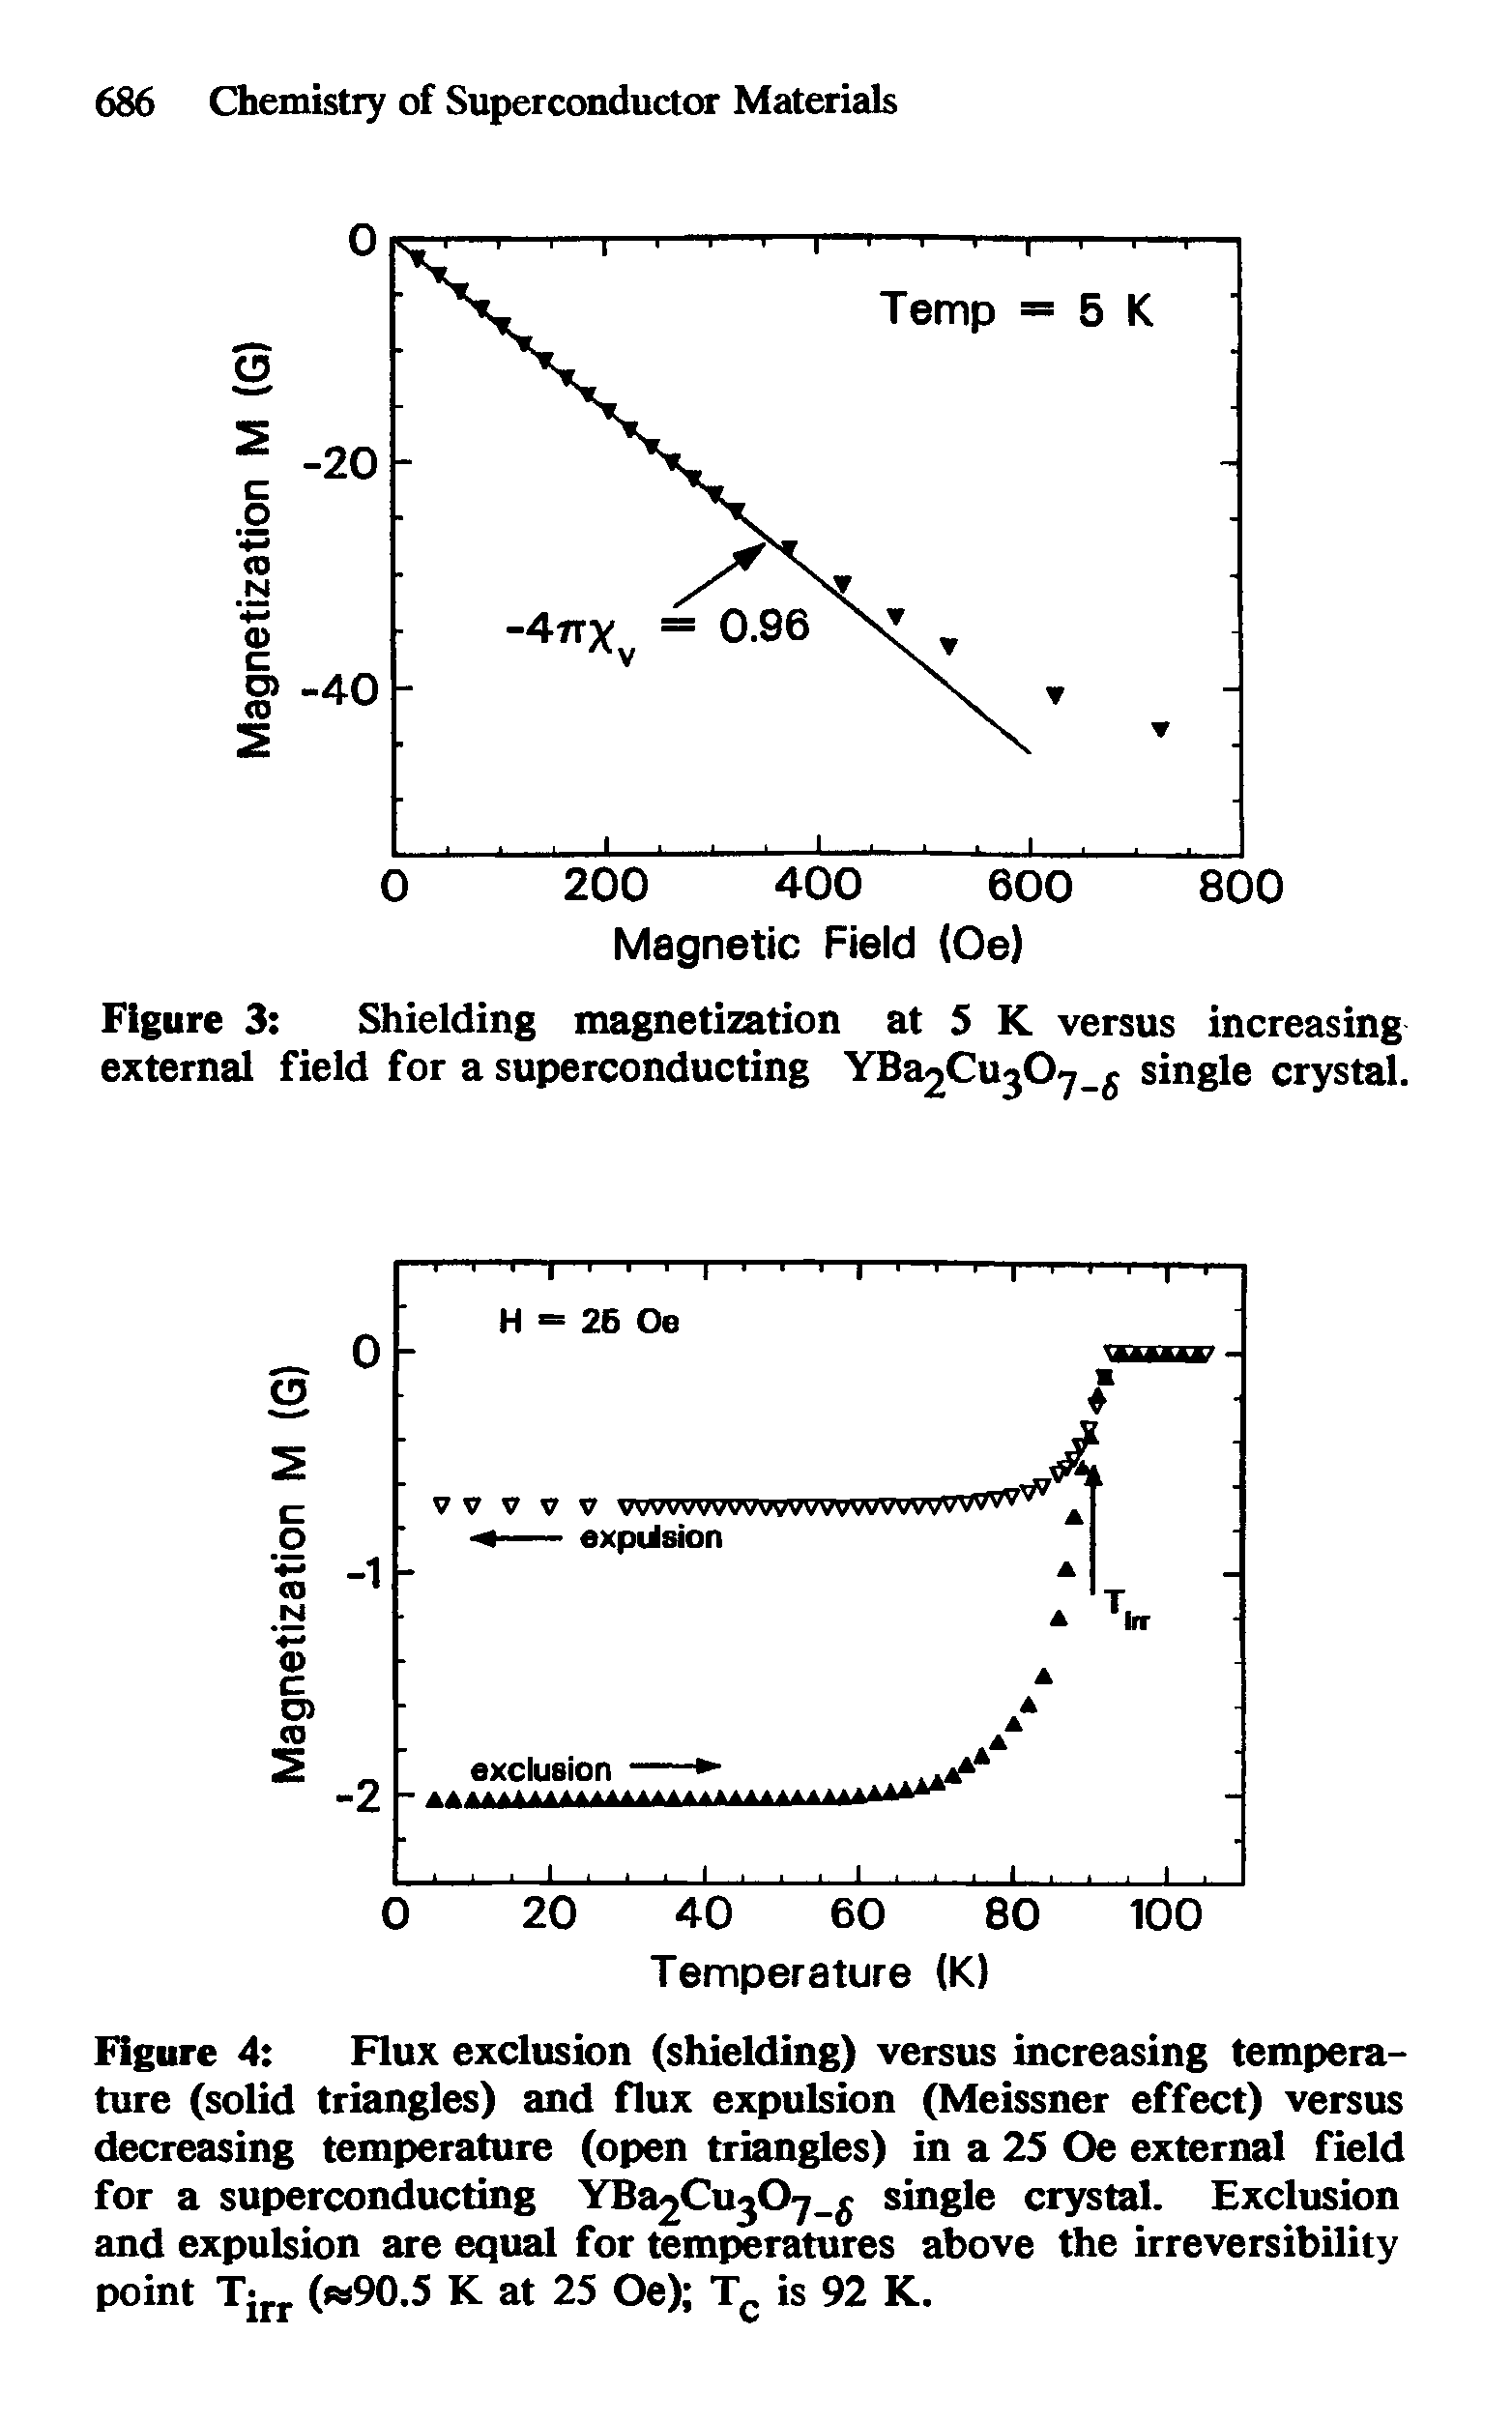 Figure 4 Flux exclusion (shielding) versus increasing temperature (solid triangles) and flux expulsion (Meissner effect) versus decreasing temperature (open triangles) in a 25 Oe external field for a superconducting YE Cu Oy.g single crystal. Exclusion and expulsion are equal for temperatures above the irreversibility point Tjrr (w90.5 K at 25 Oe) Tc is 92 K.